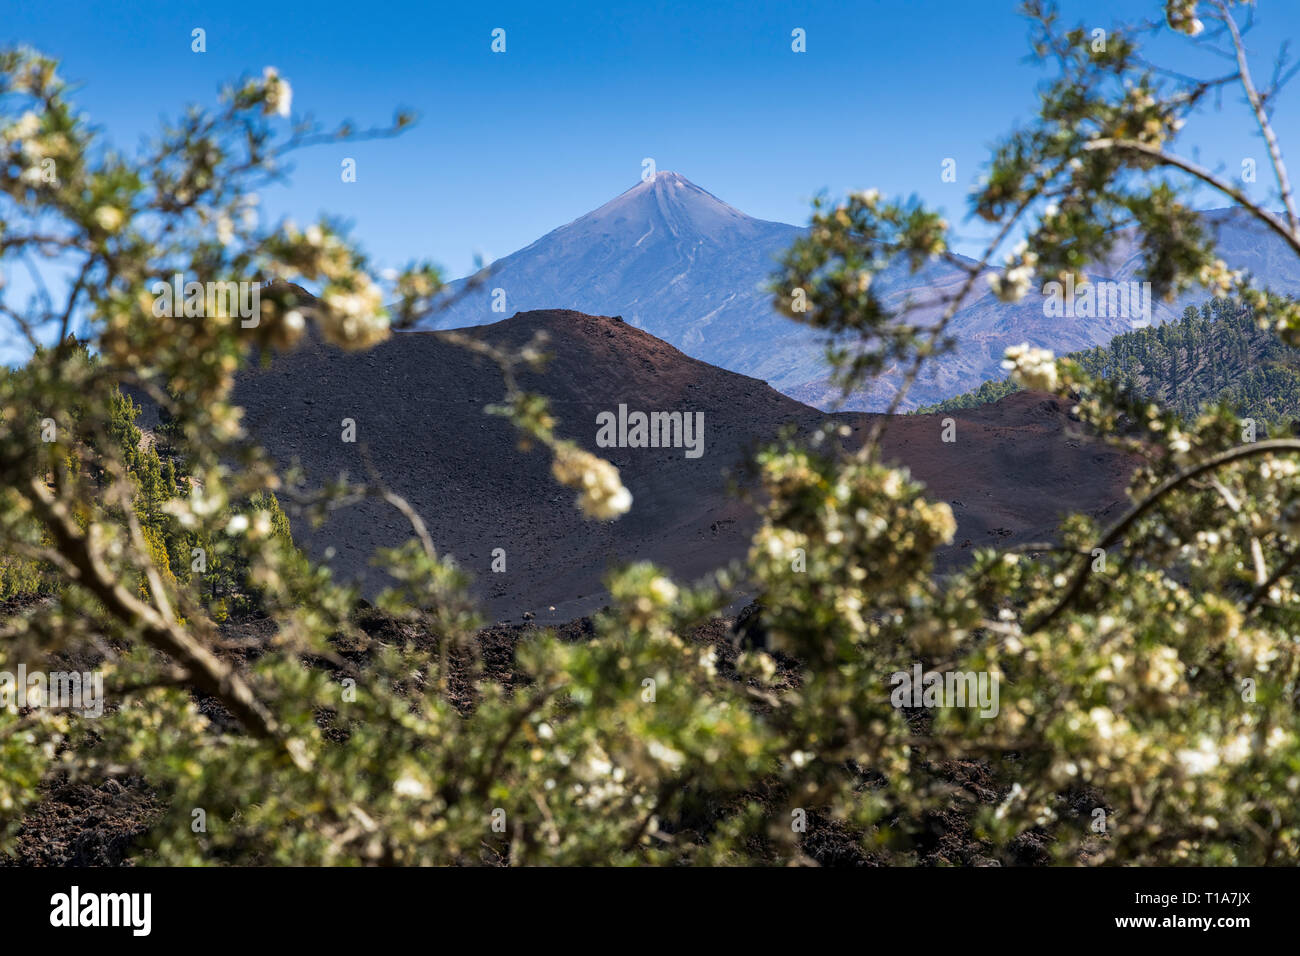 Mount Teide and the Chinyero volcano seen through the branches of a flowering Chamaecytisus proliferus shrub in the volcanic landscape, Chinyero, Tene Stock Photo